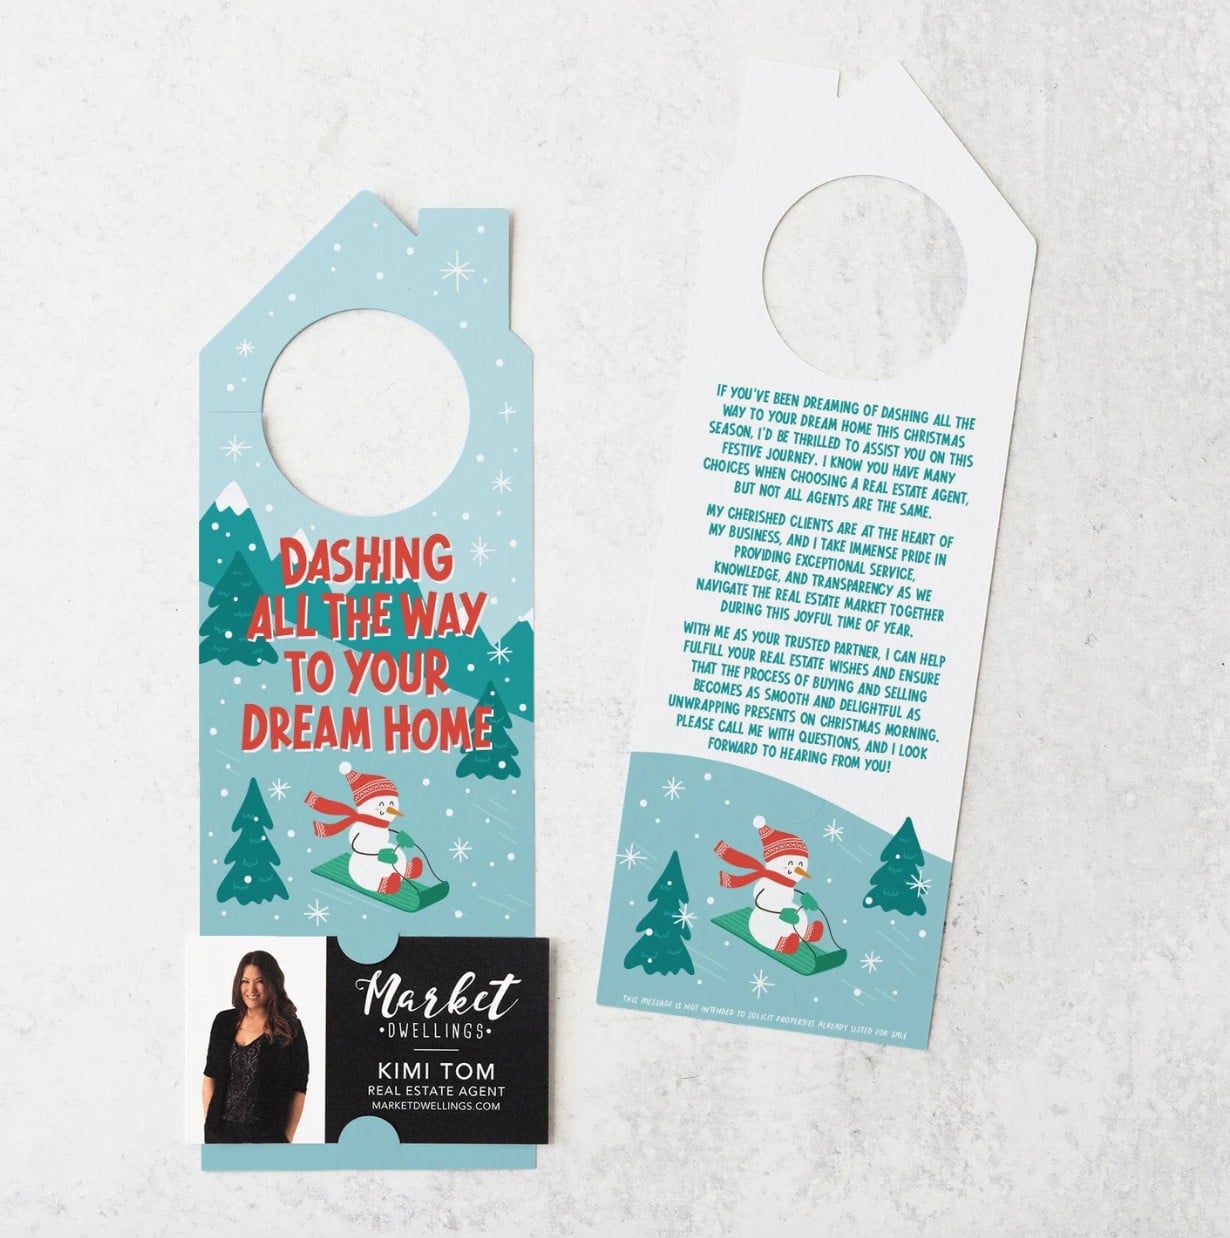 House shaped door hanger with colorful holiday image on front and back of snowman on a sled, with "Dashing all the way to your dream home" printed on the front.